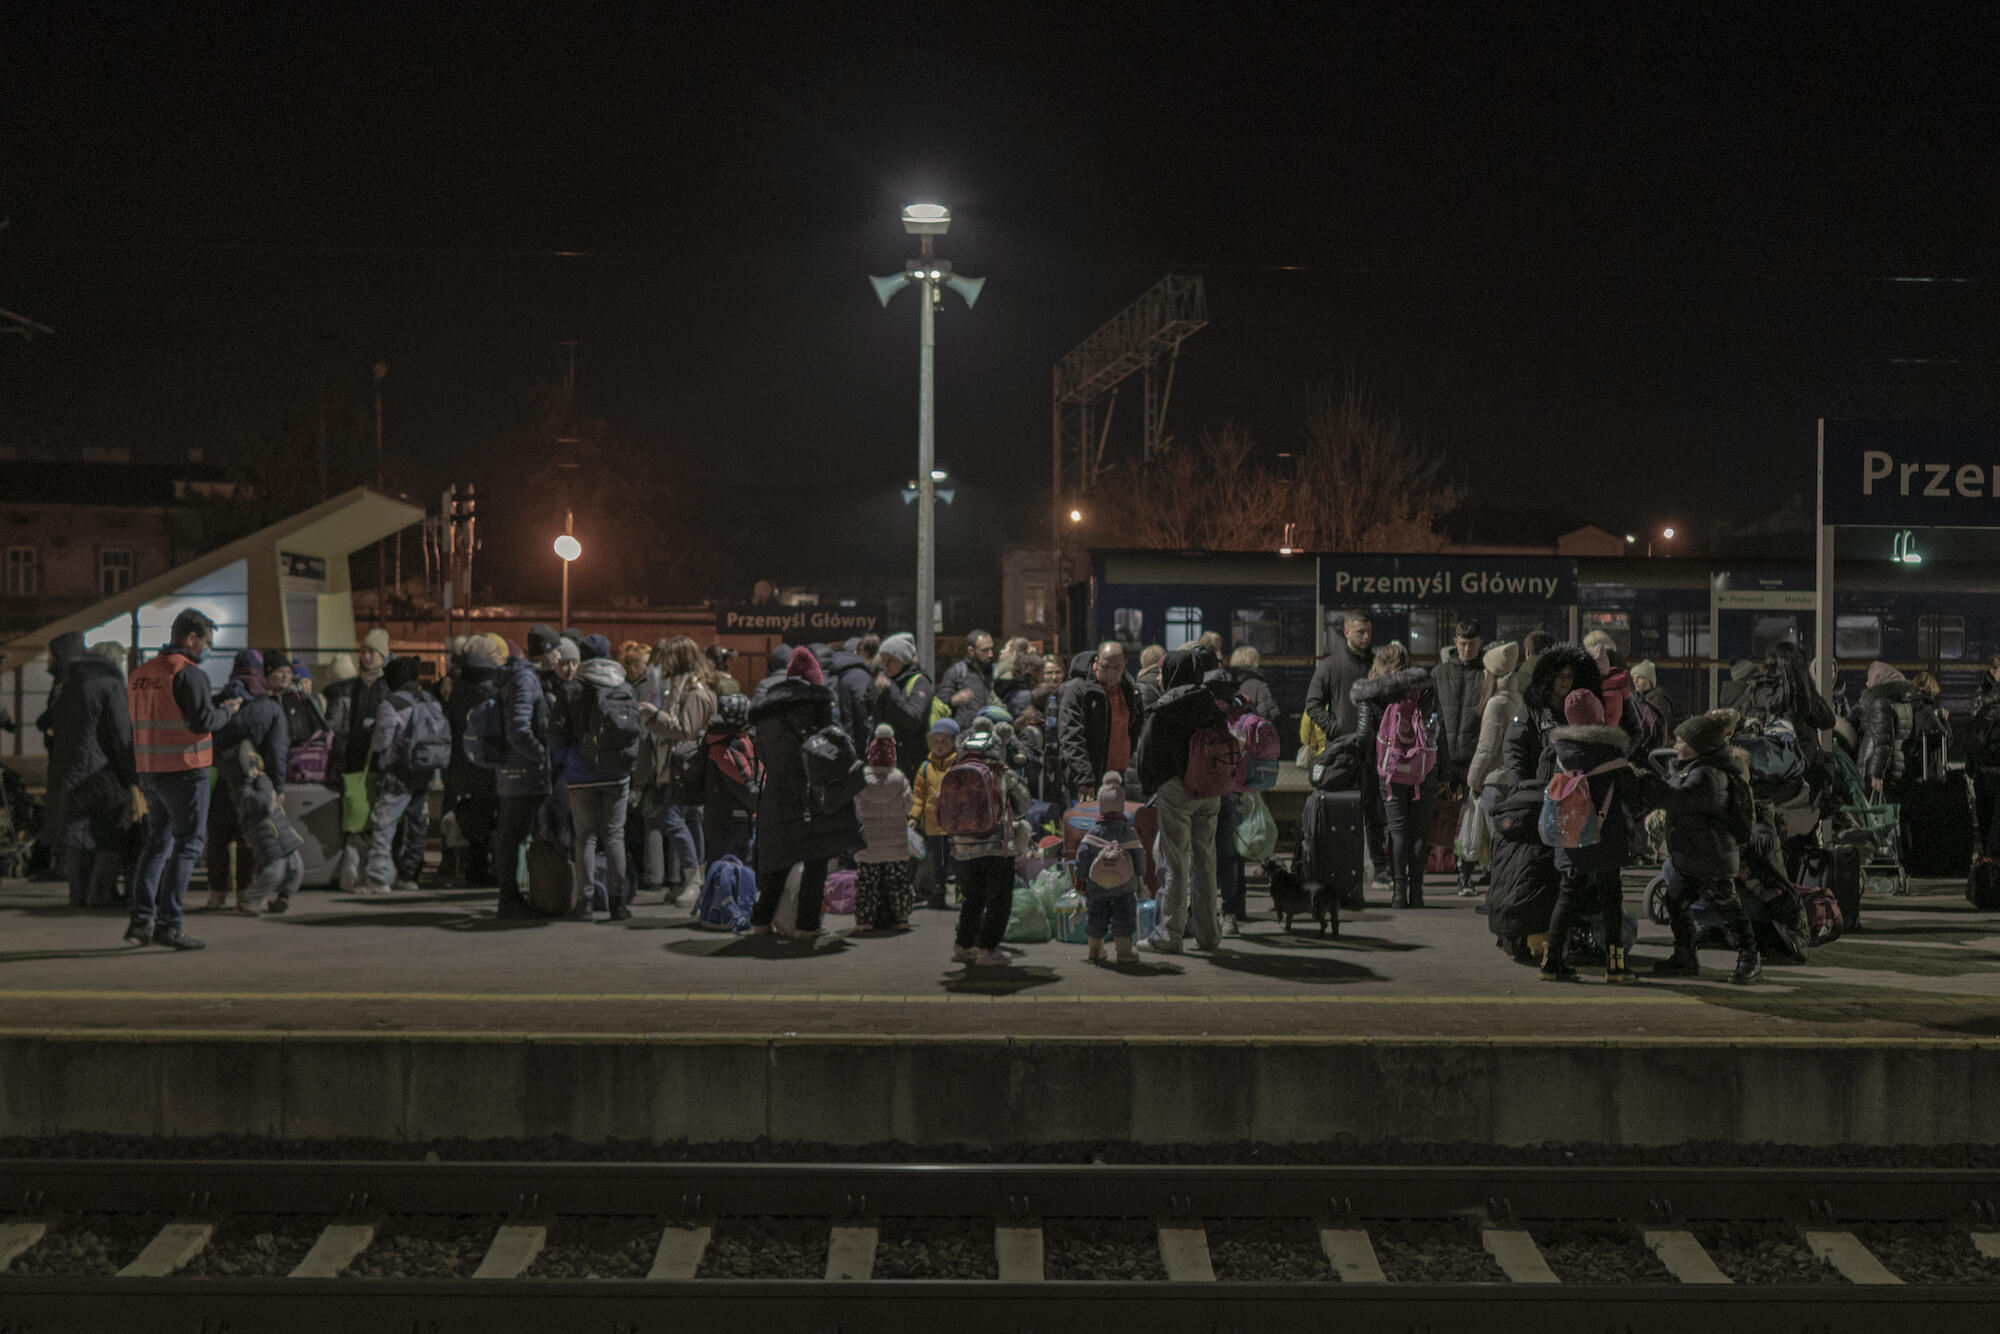 A group of many people stand outside on a train station platform.